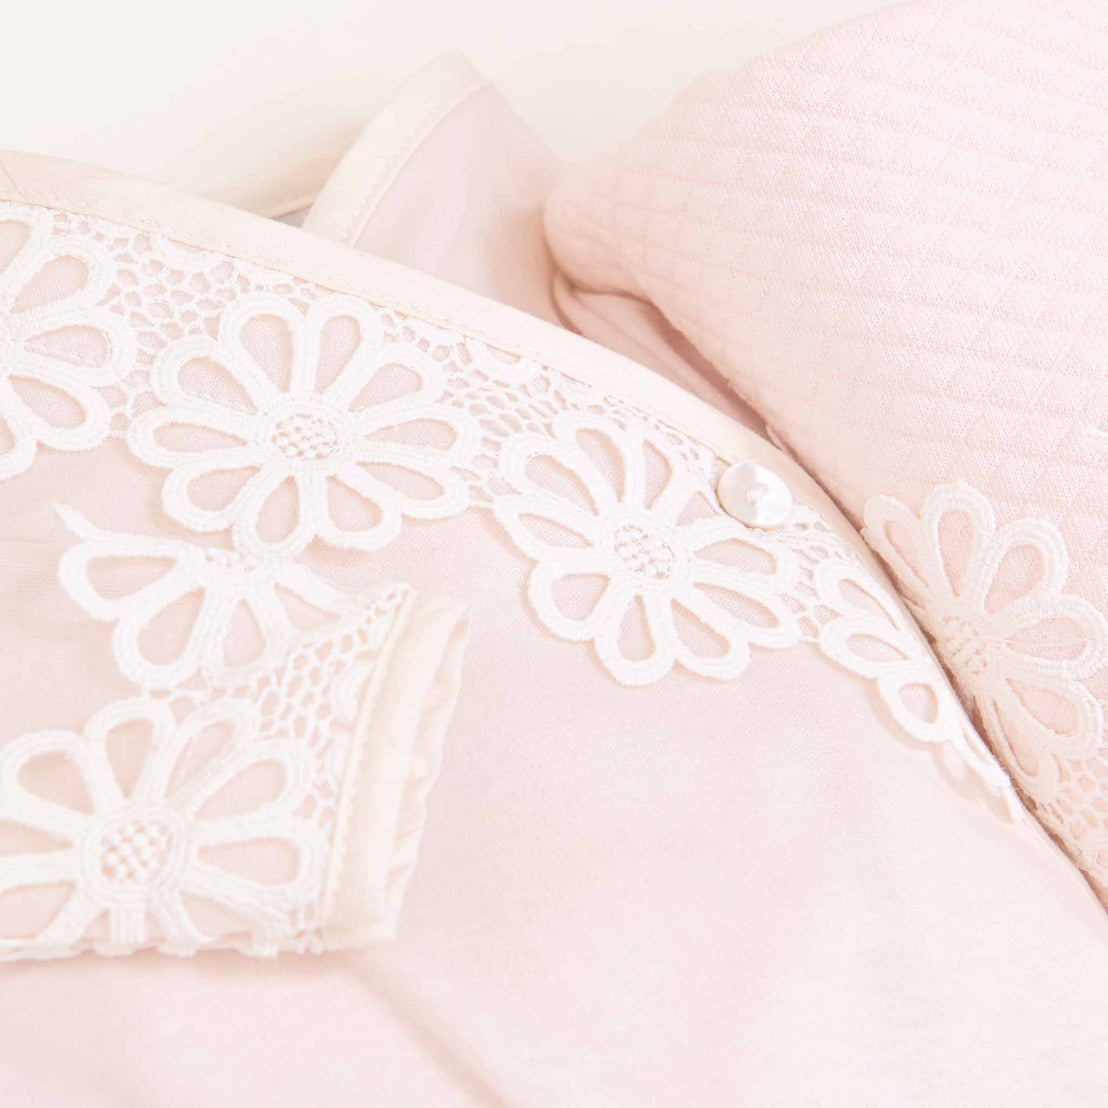 Close-up of a delicate pink Hannah Knot Gown & Bonnet from Baby Beau & Belle showcasing intricate lace details with floral patterns, against a soft, textured cushion background.